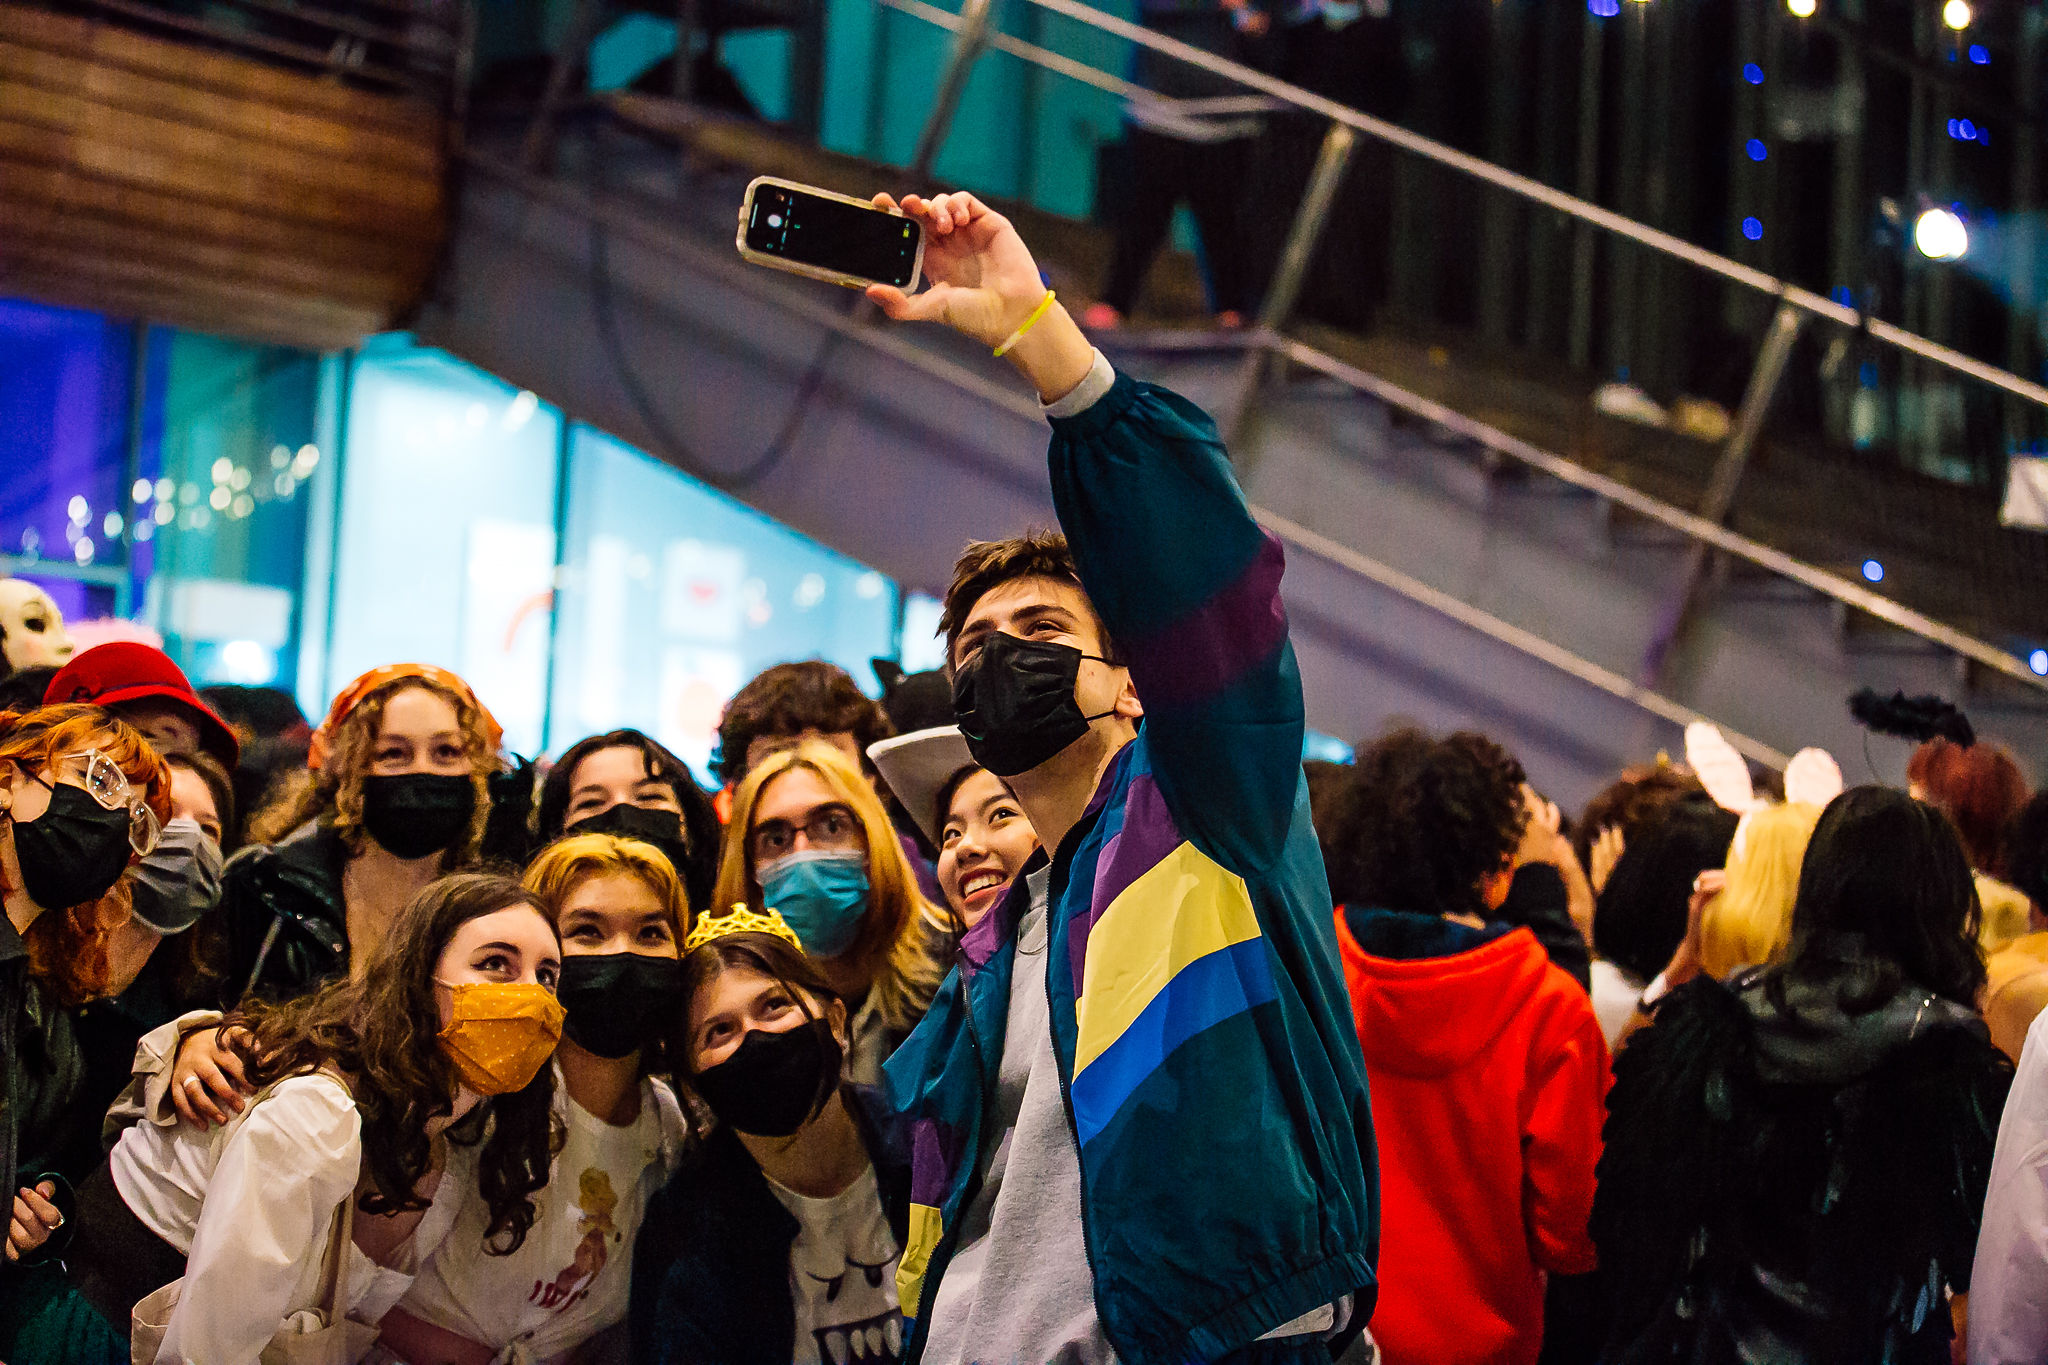 A group of teens, mostly wearing face masks, take a selfie in front of the ICA at night